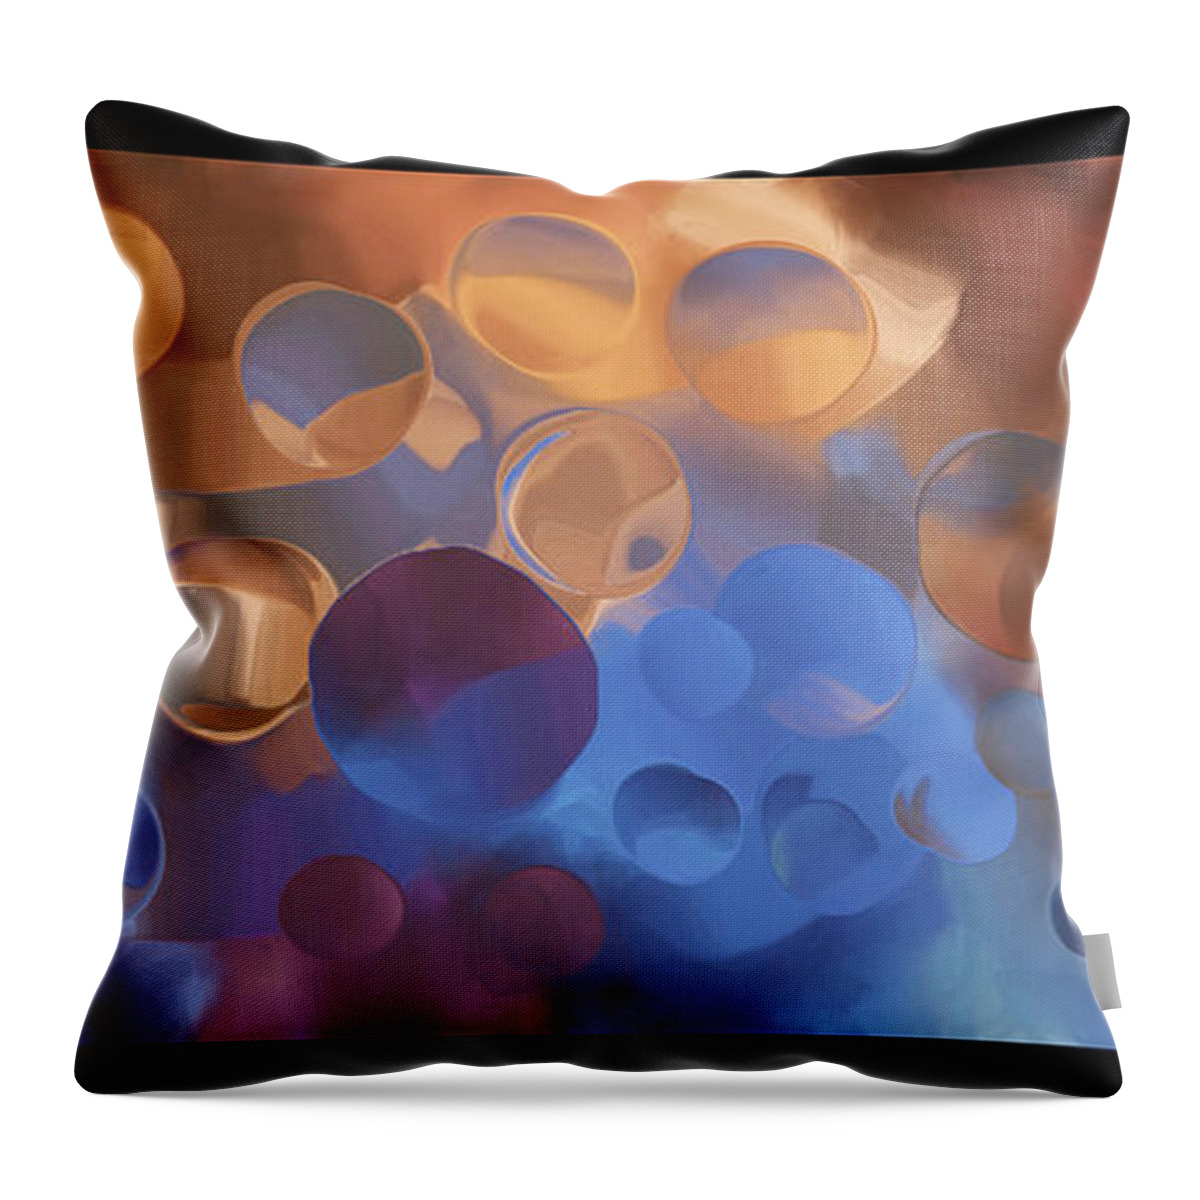 Colors Throw Pillow featuring the painting Idutknow by Steven Lebron Langston